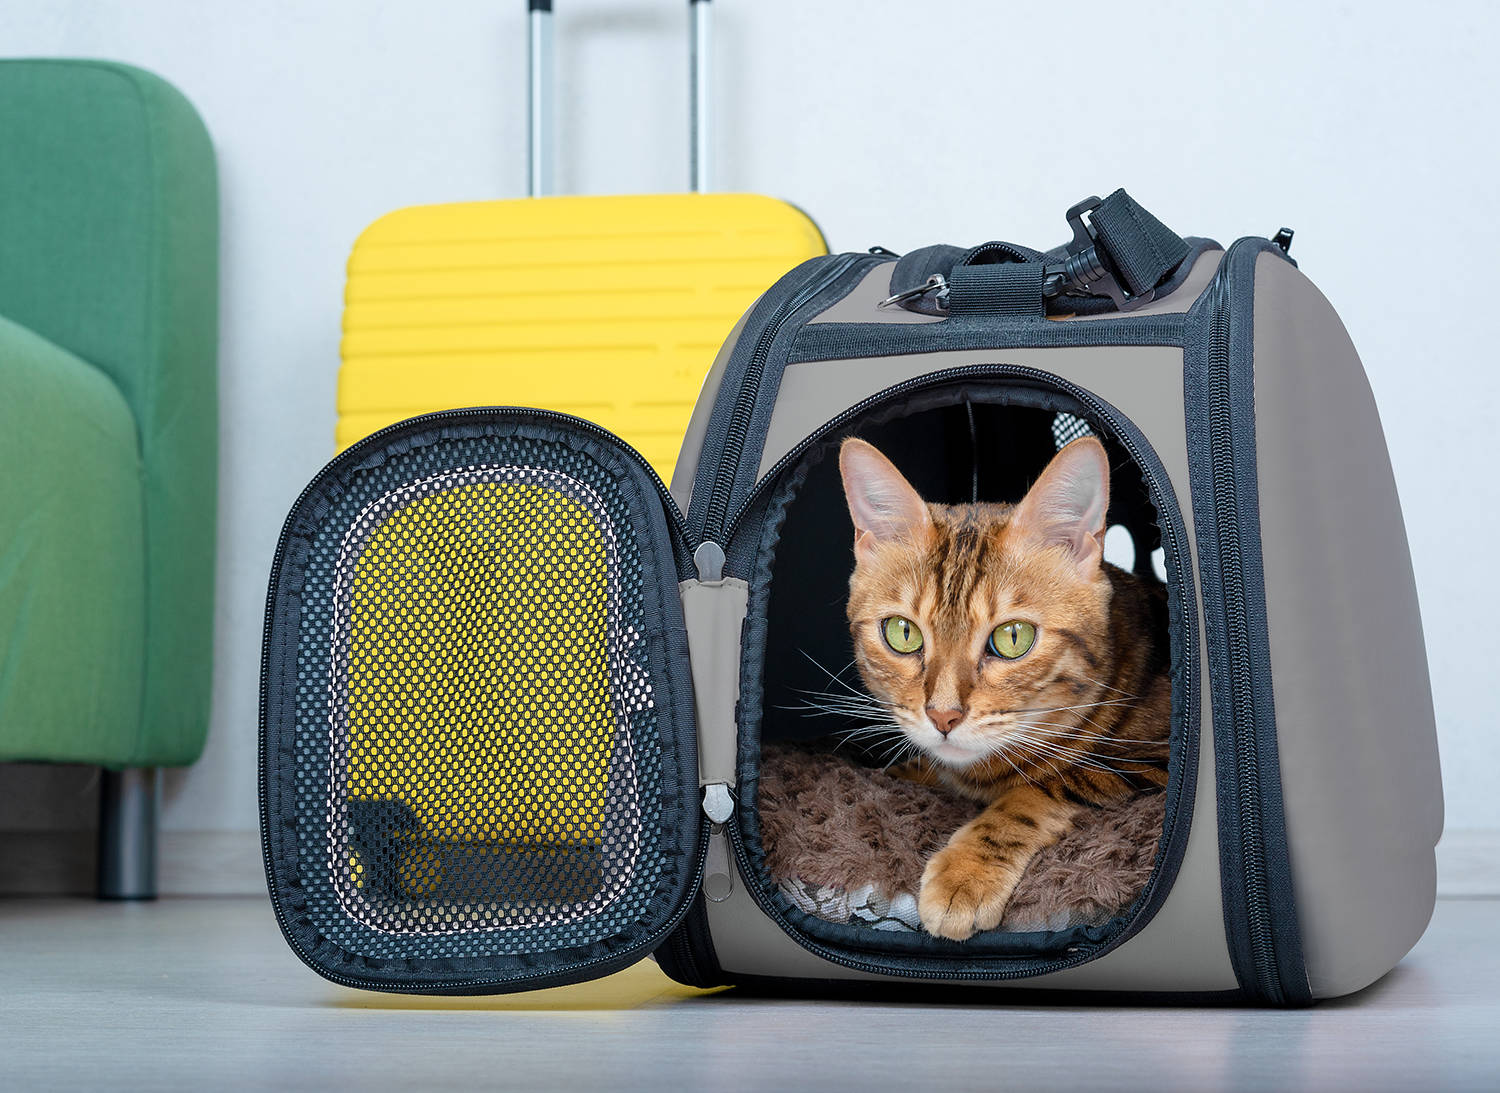 Bengal cat in a soft carrier on the floor next to a suitcase